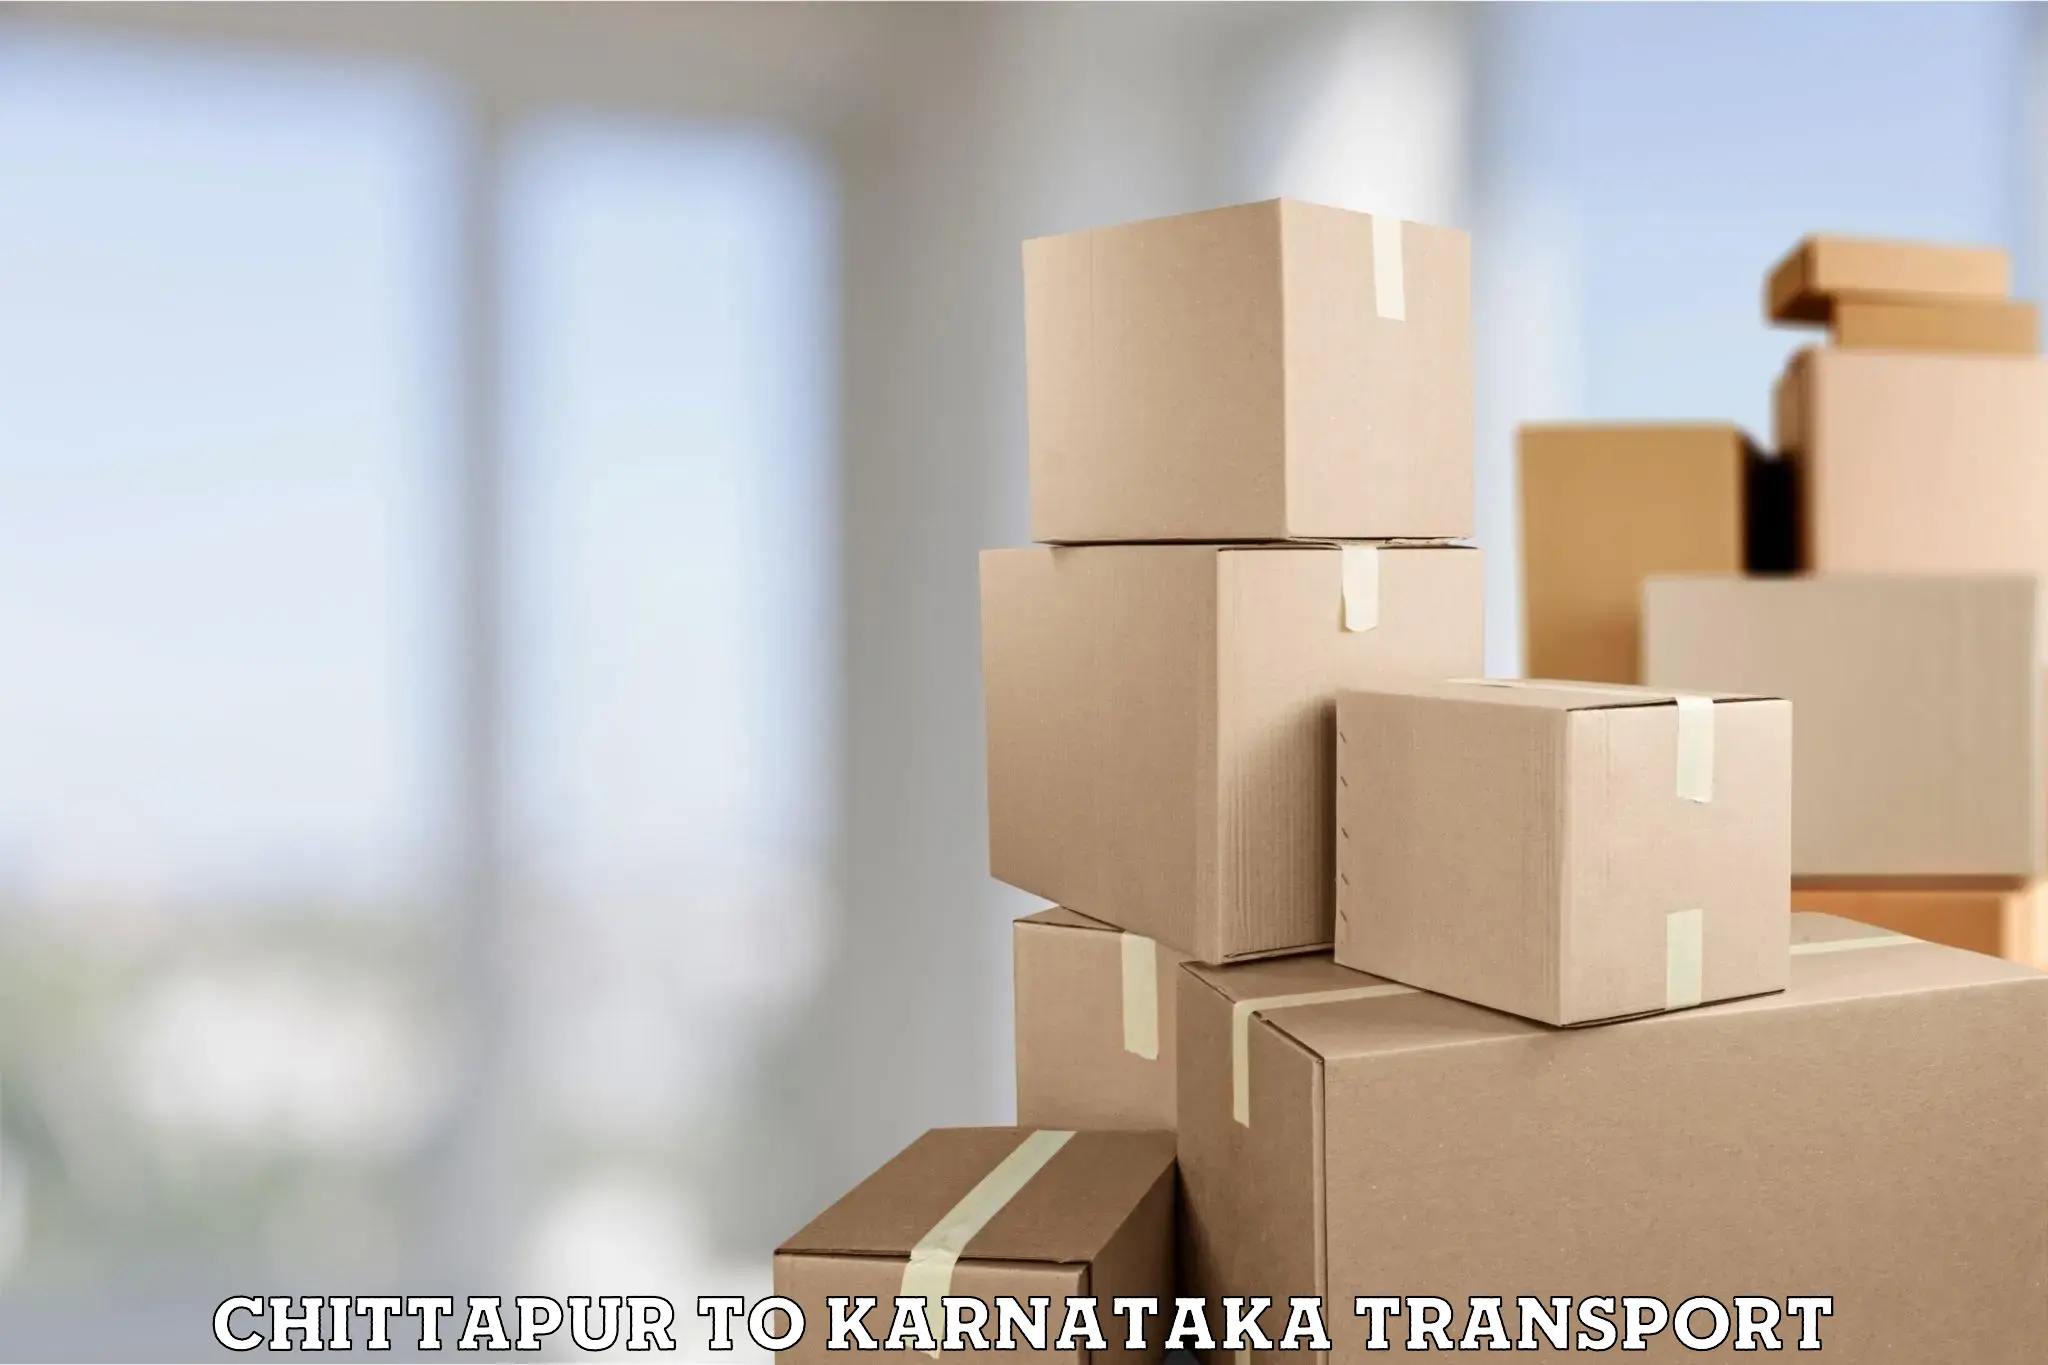 Air freight transport services in Chittapur to Bengaluru